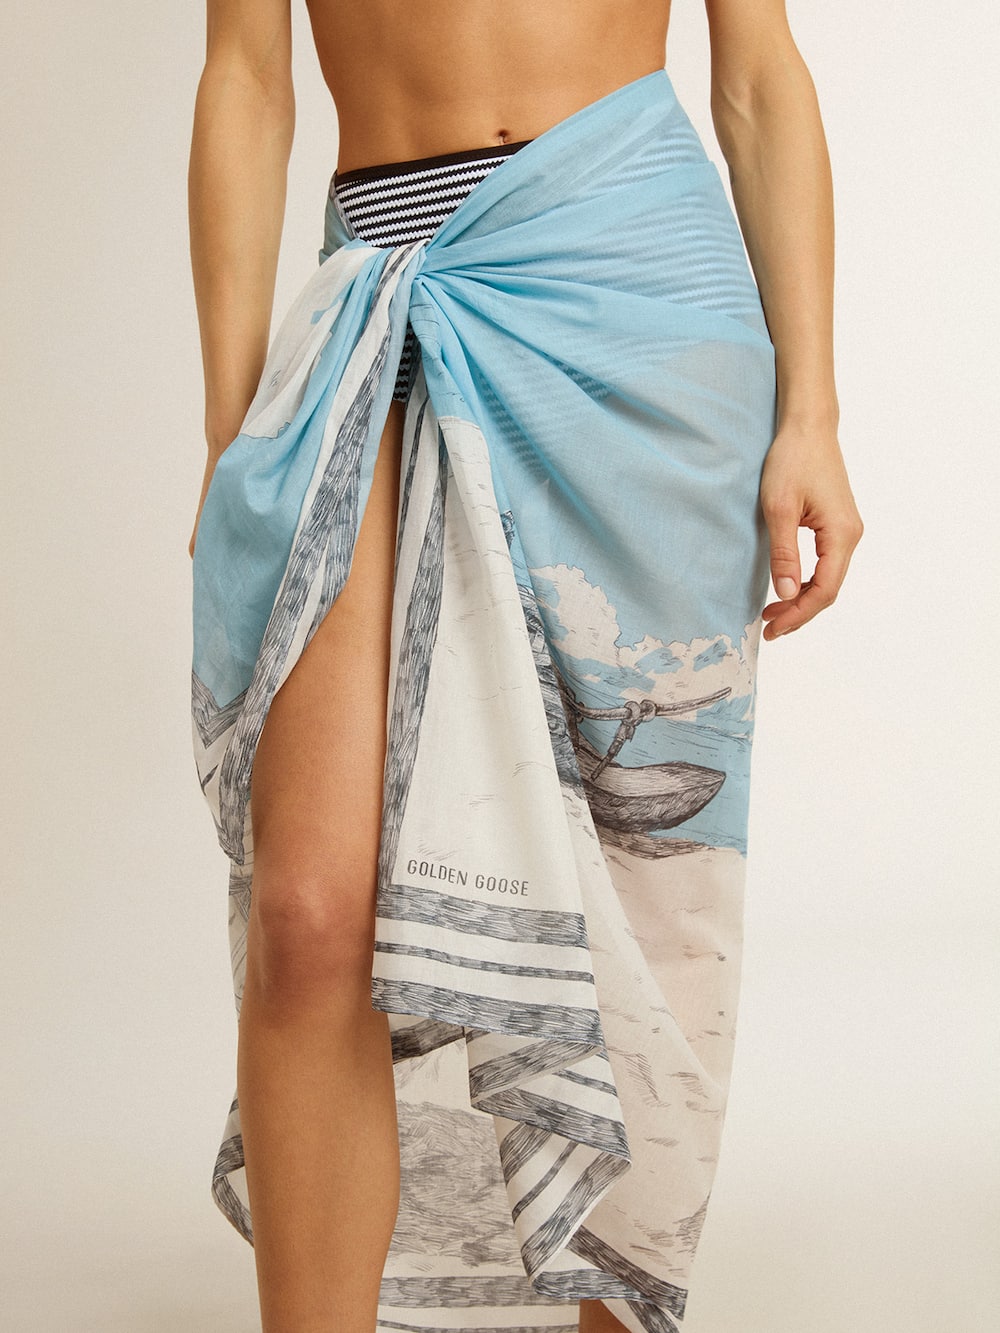 Golden Goose - Sarong in cotton voile with all-over cream and light blue print in 